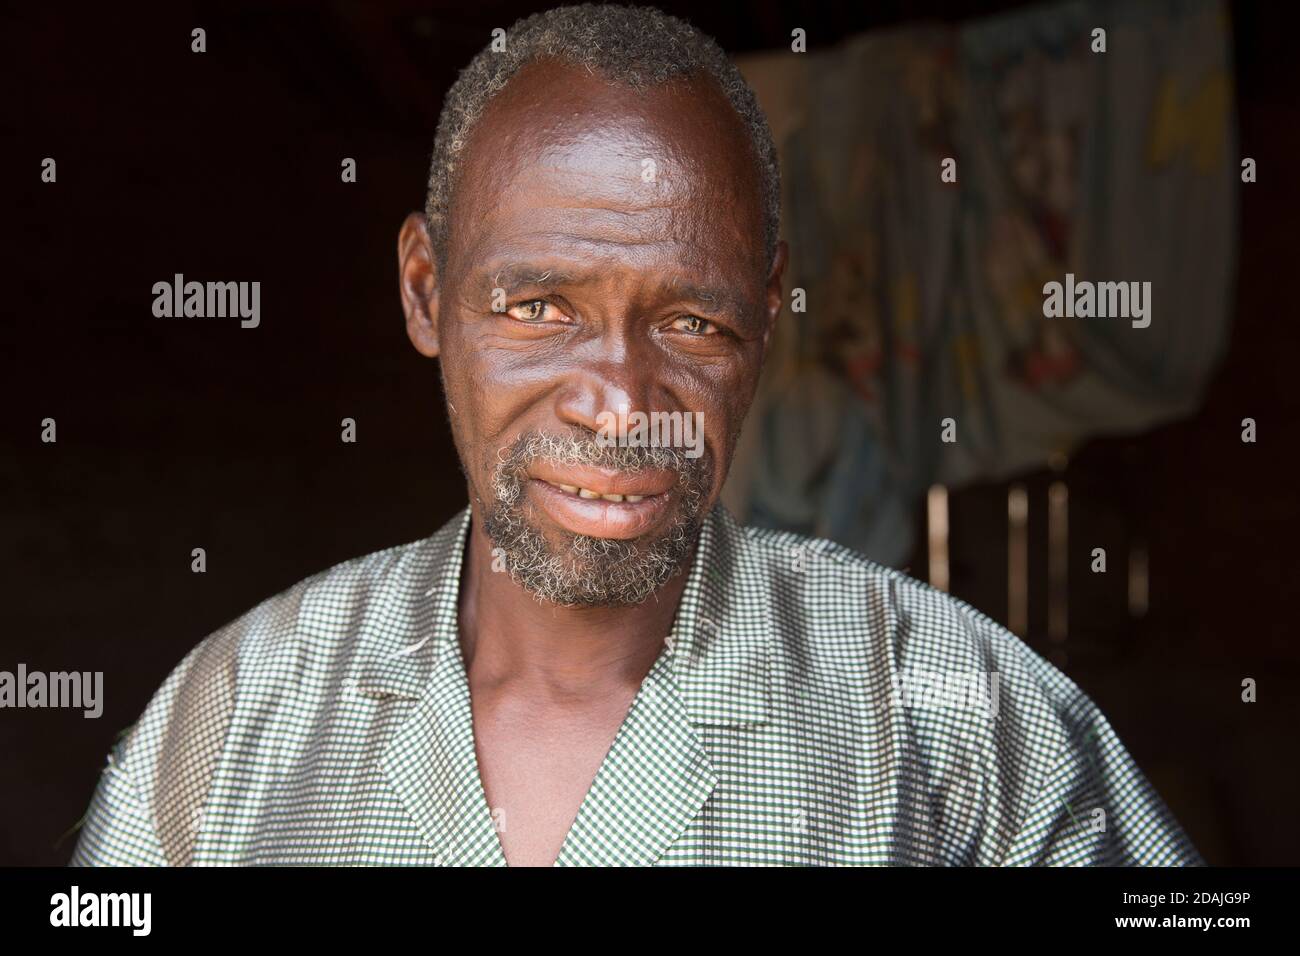 Delaba Koro, village 60 kms from Selingue, Mali, 27th April 2015; This village took many people displaced by the dam. Oualama Doumbia, 56,  is a farmer, fisherman, hunter, and son of the previous chief. His expectations of the dam have not been met - he hoped for good health services, clean water, electricity and an overall improvement in agriculture, but 30 years later there is still no electricity, only one broken pump, the medical centre is not well equipped and there is only primary school for the children.  His family were amongst the village’s first settlers. There were 500 people in the Stock Photo